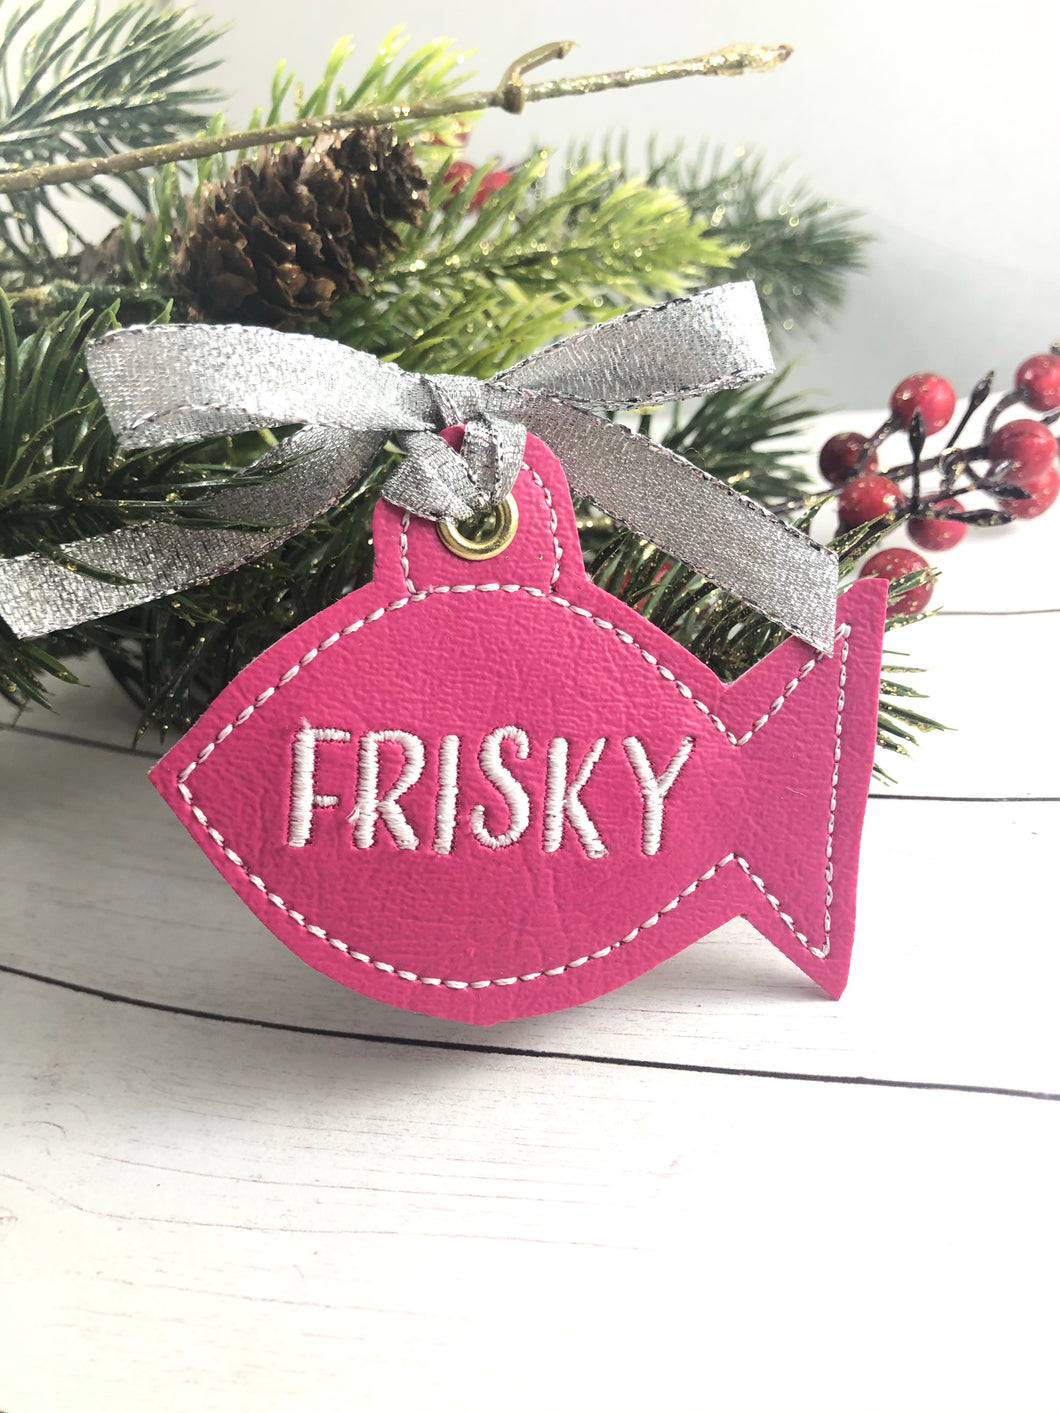 BLANK Fish Eyelet Tag/Ornament for 4x4 hoops